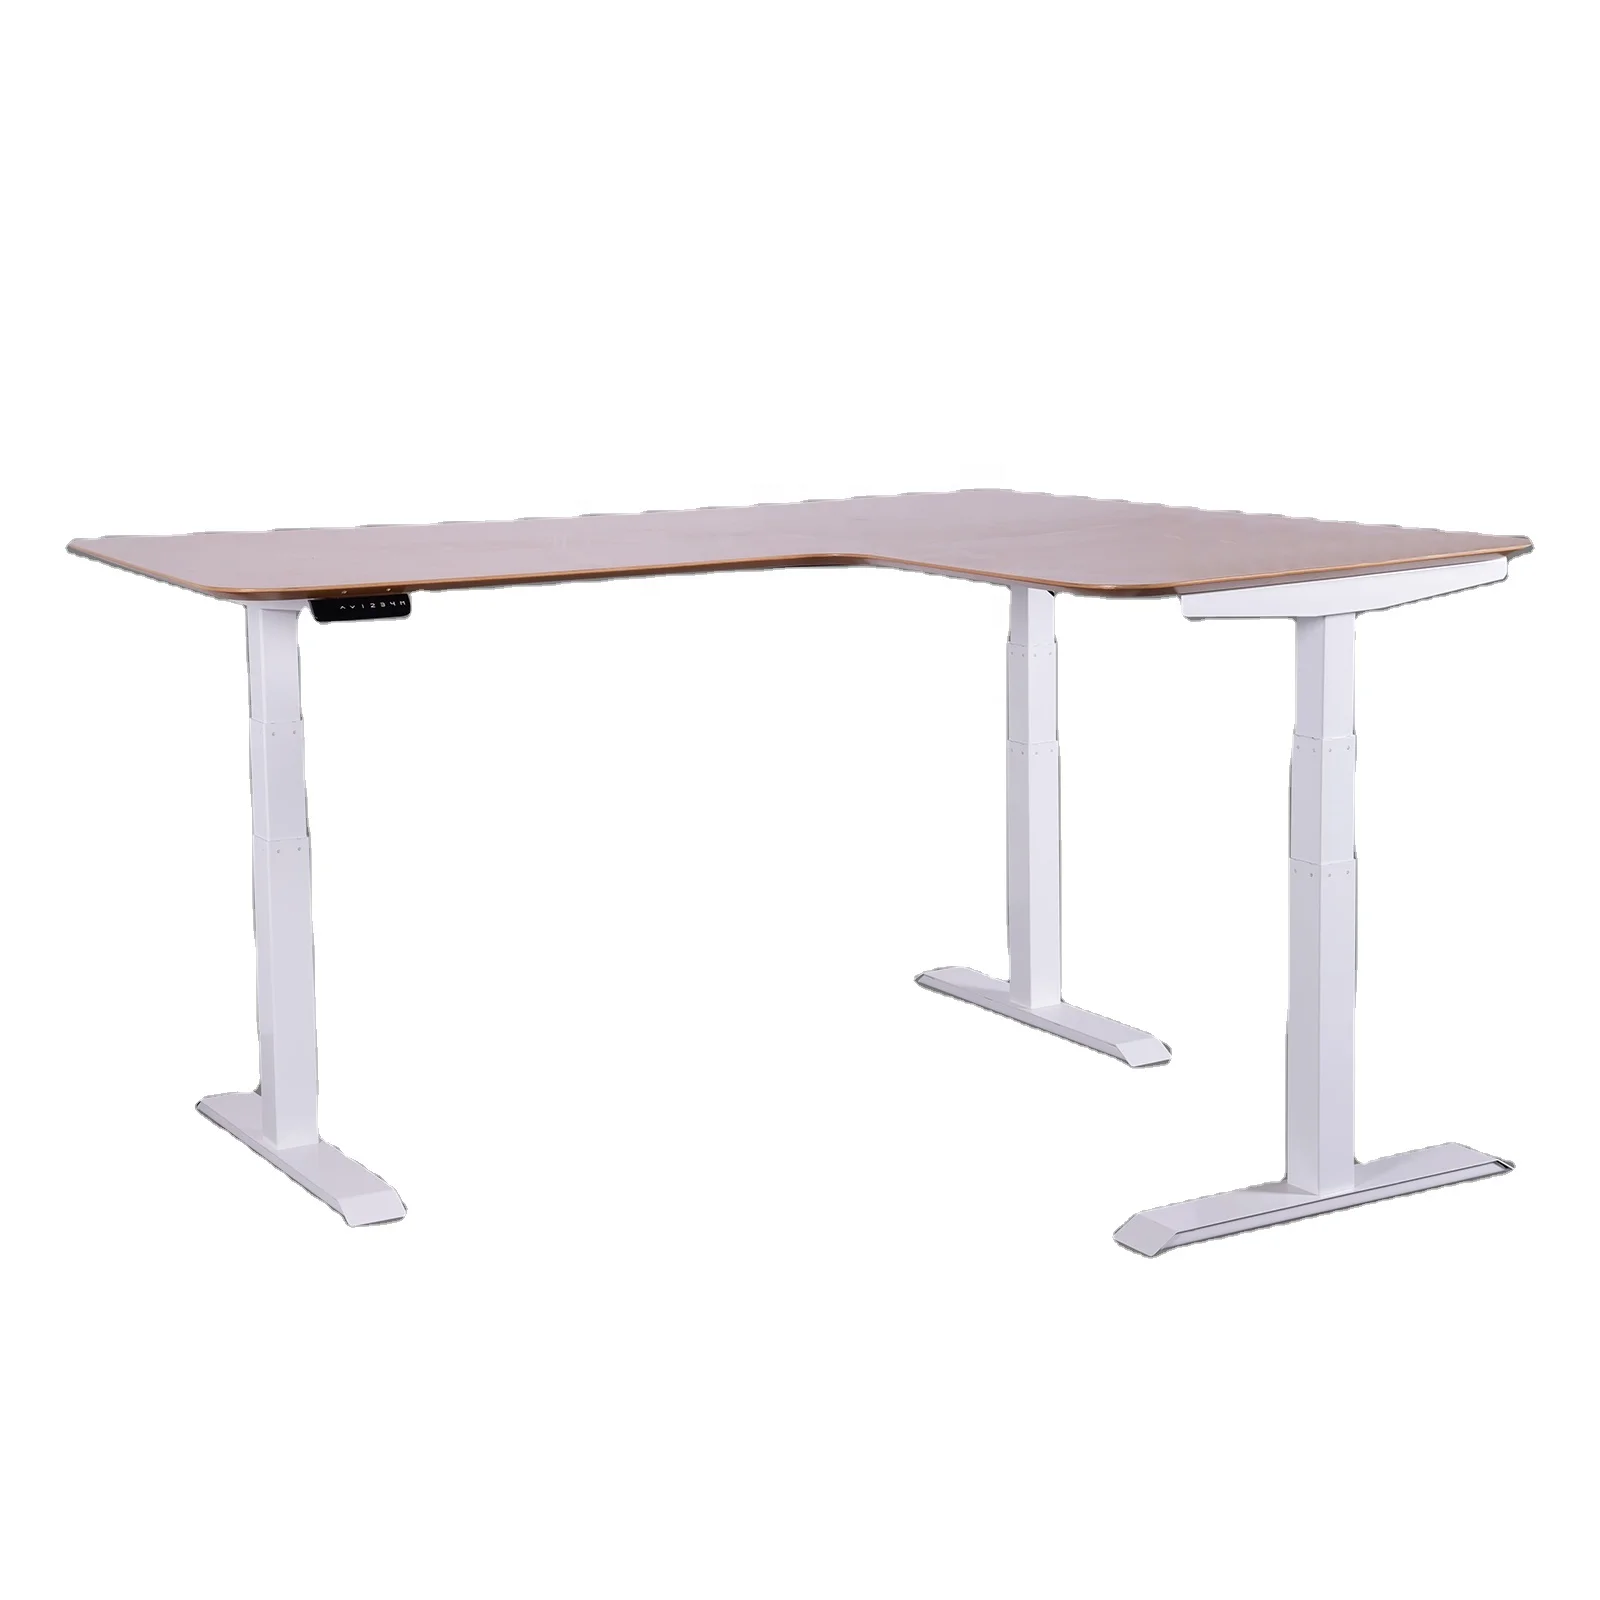 Dual motor electric height adjustable desks for home office sit/stand working,90 degree stitching angle desk